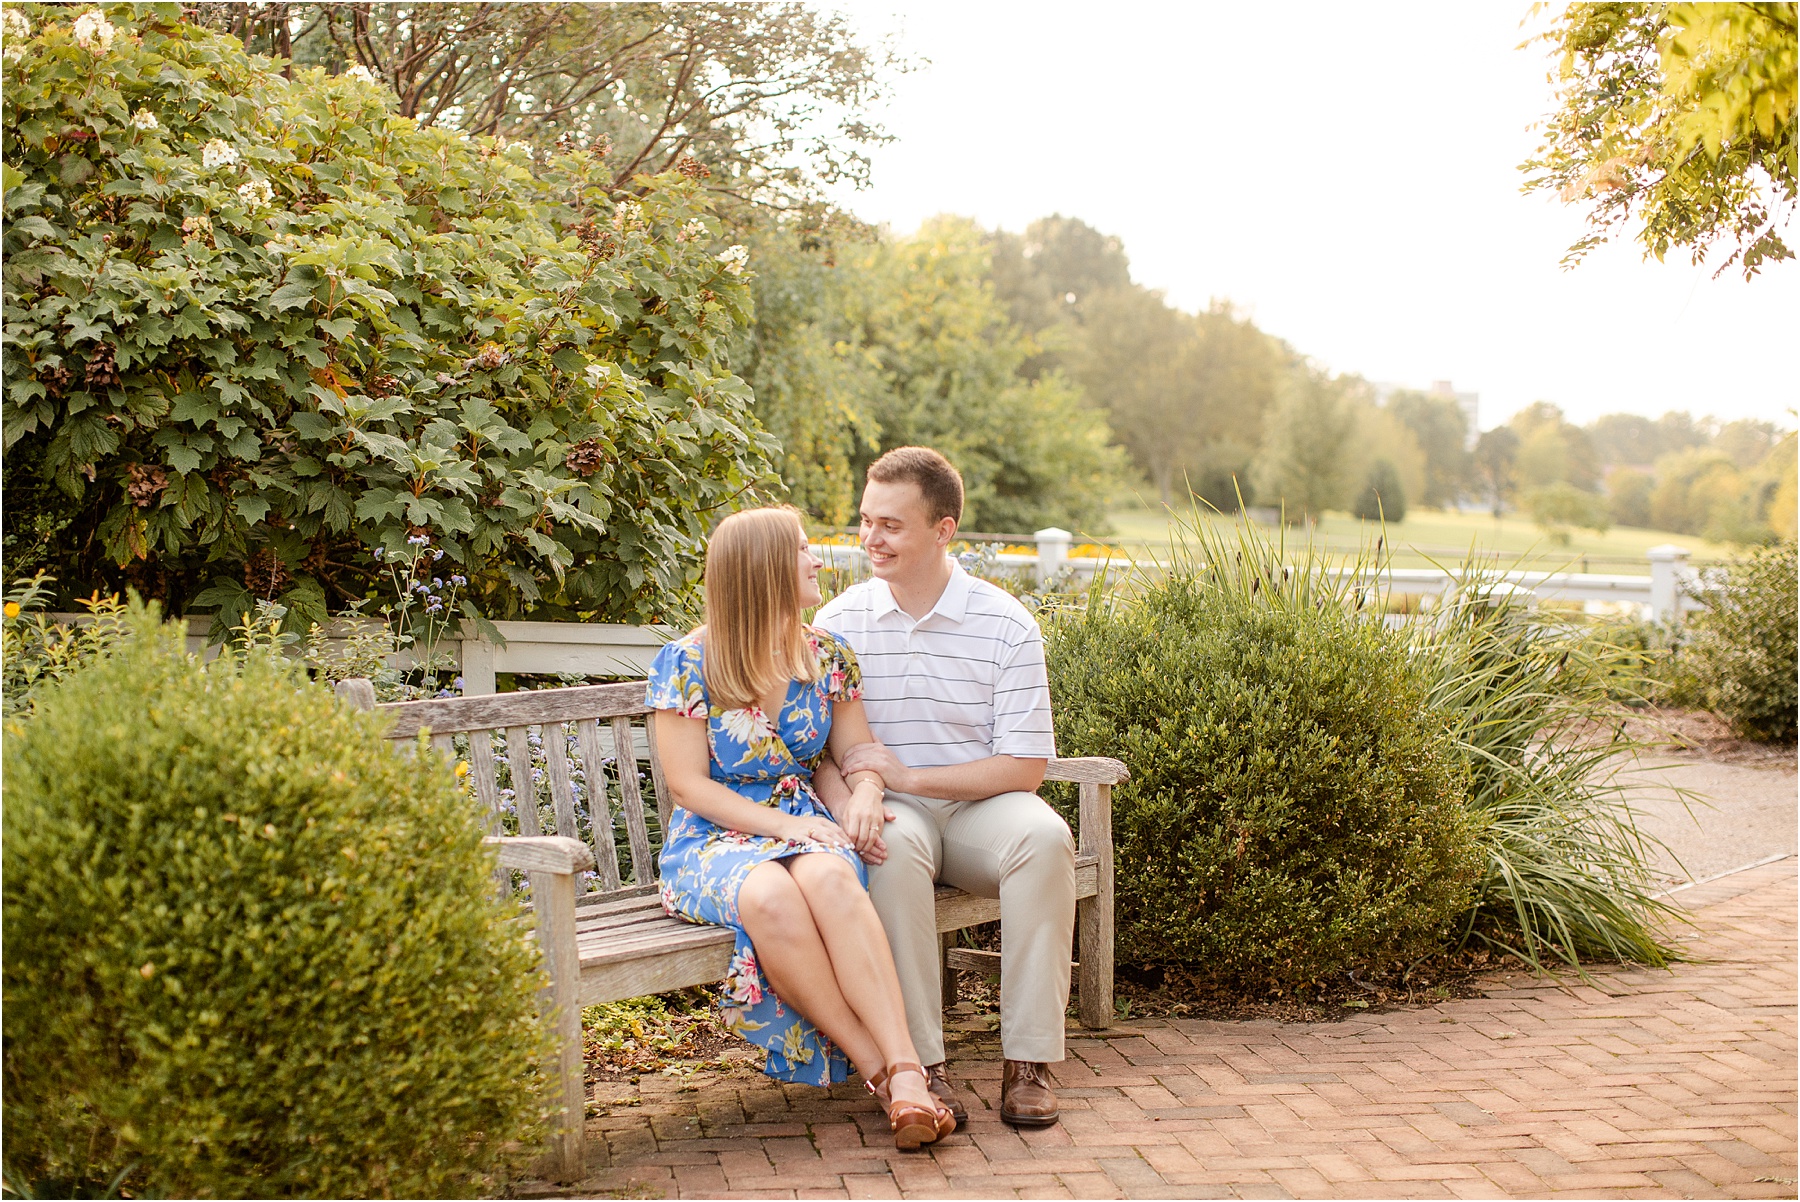 Engaged couple sitting on park bench in Kentucky botanical gardens